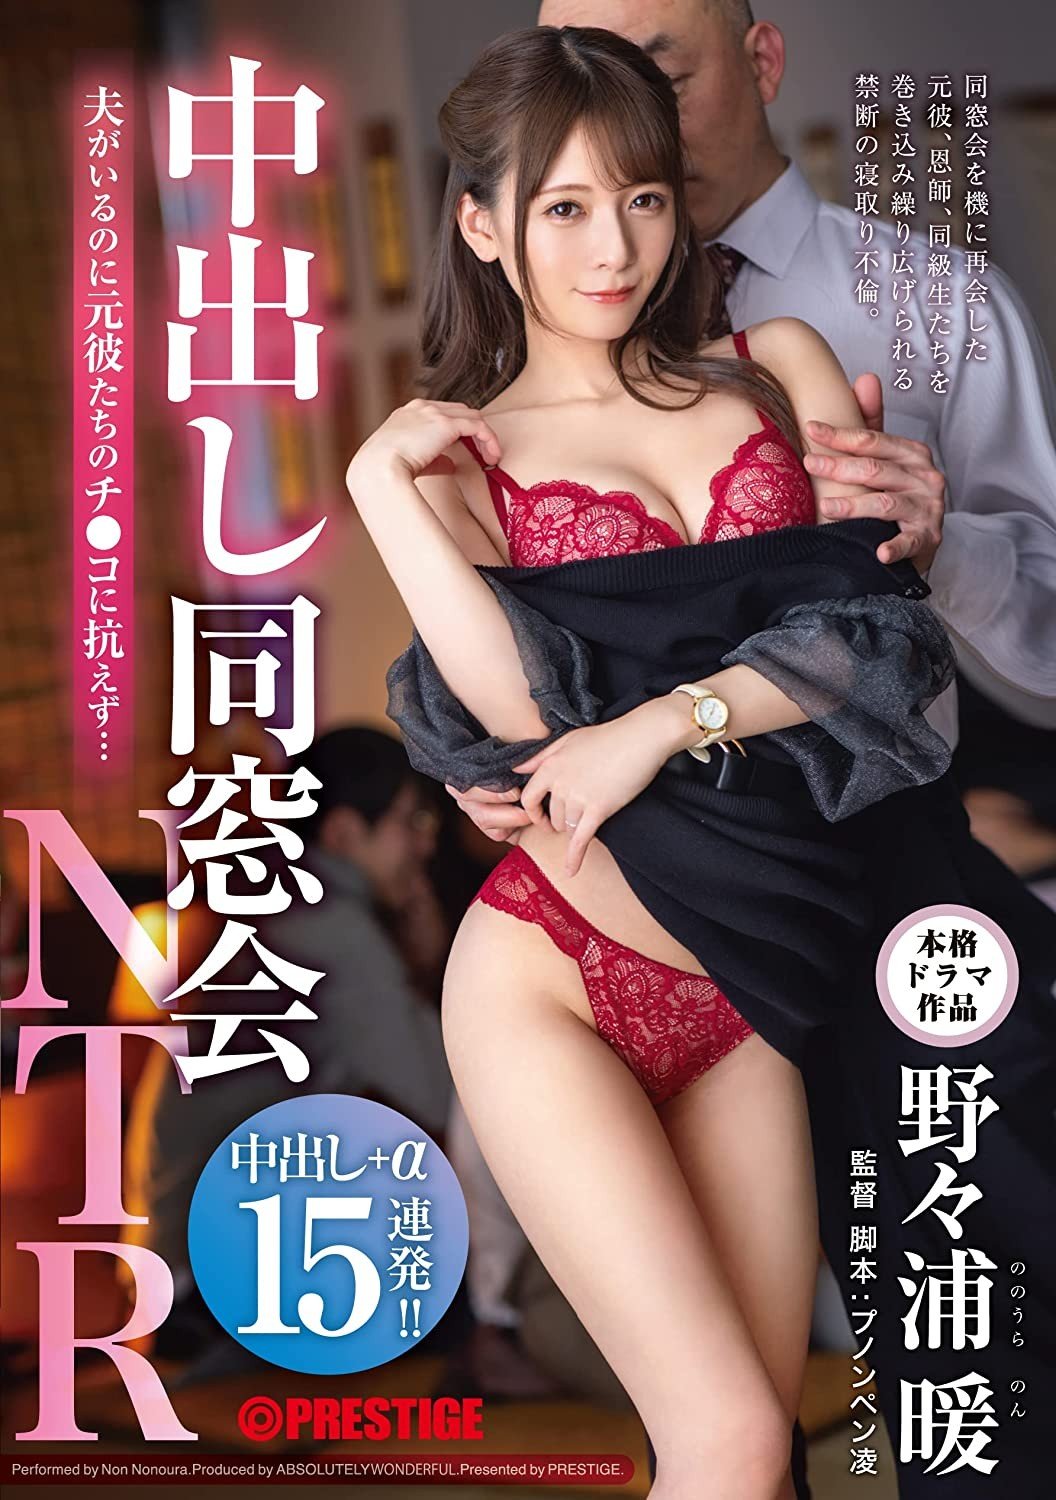 J-LIST! on X: A lot of fans hate #Netrare in hentai form, but what about live  action JAV? Nakadashi Class Reunion NTR -- Non Nonoura  t.coTtk2PtBruR t.co1iWMcC1WcG  X